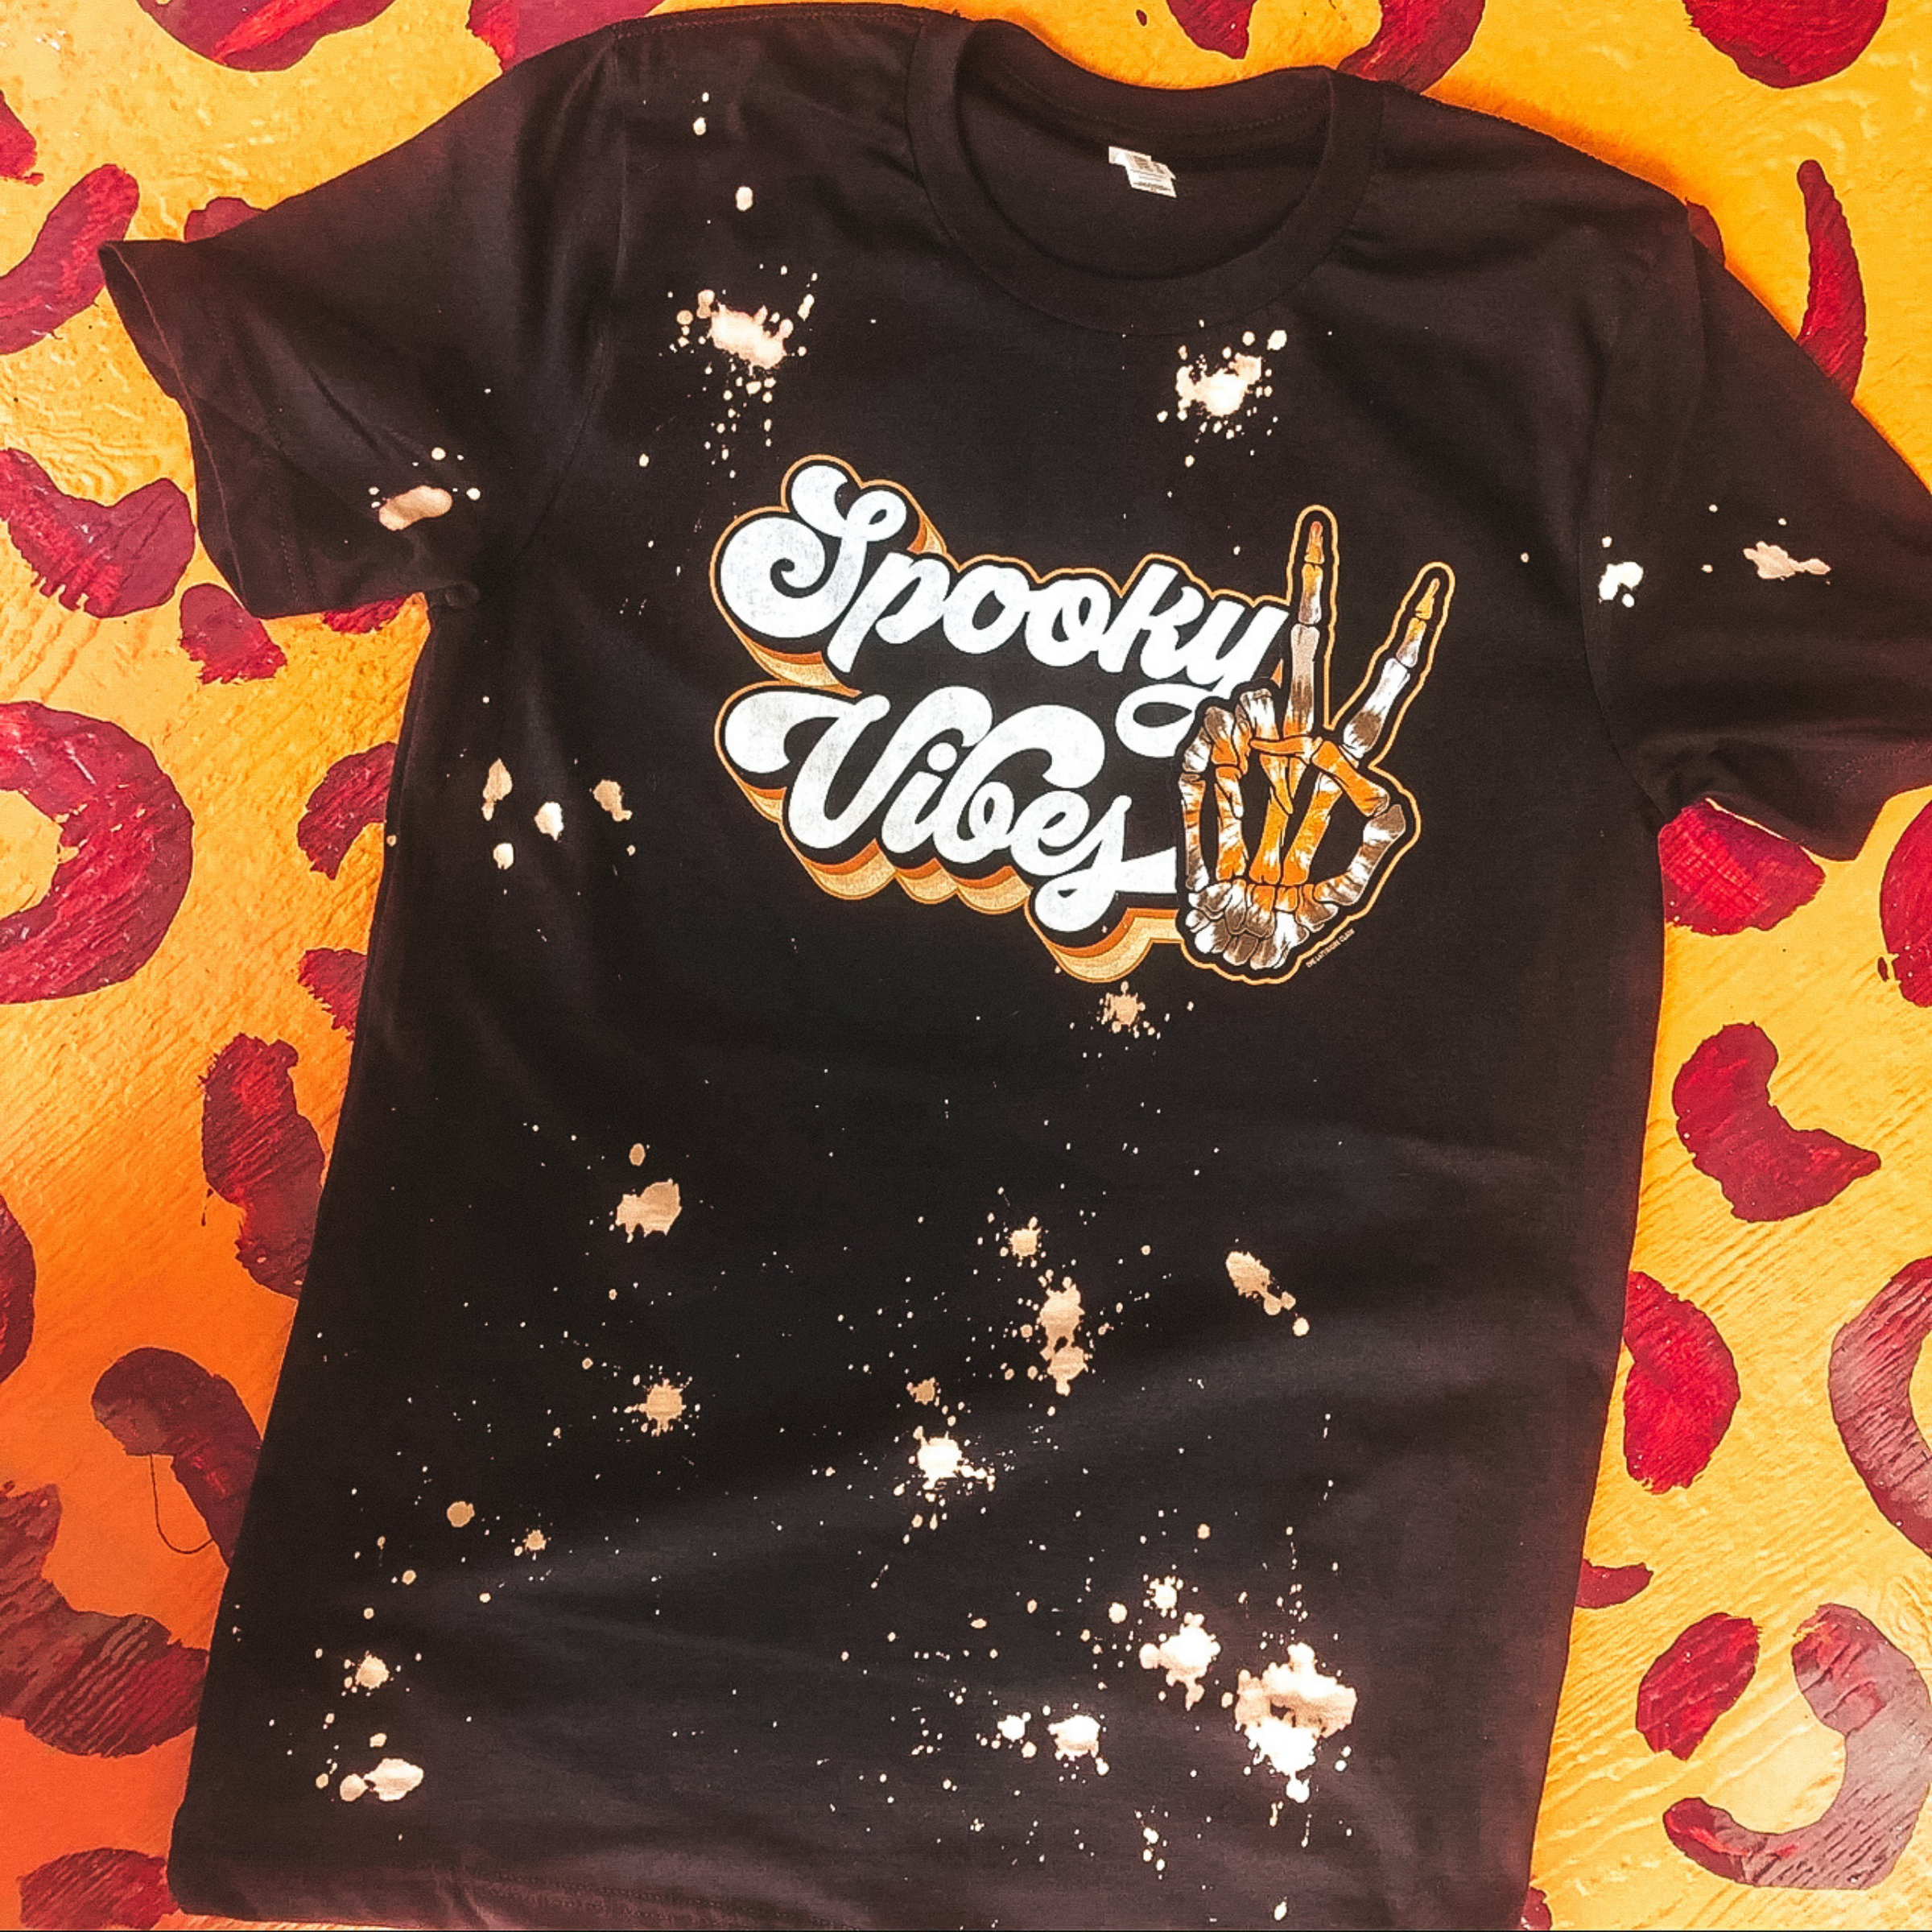 splatter graphic tee in black which reads "spooky vibes" in a groovy font with a skeleton hand doing a peace sign gesture. Tee is laying on a leopard print backdrop. 